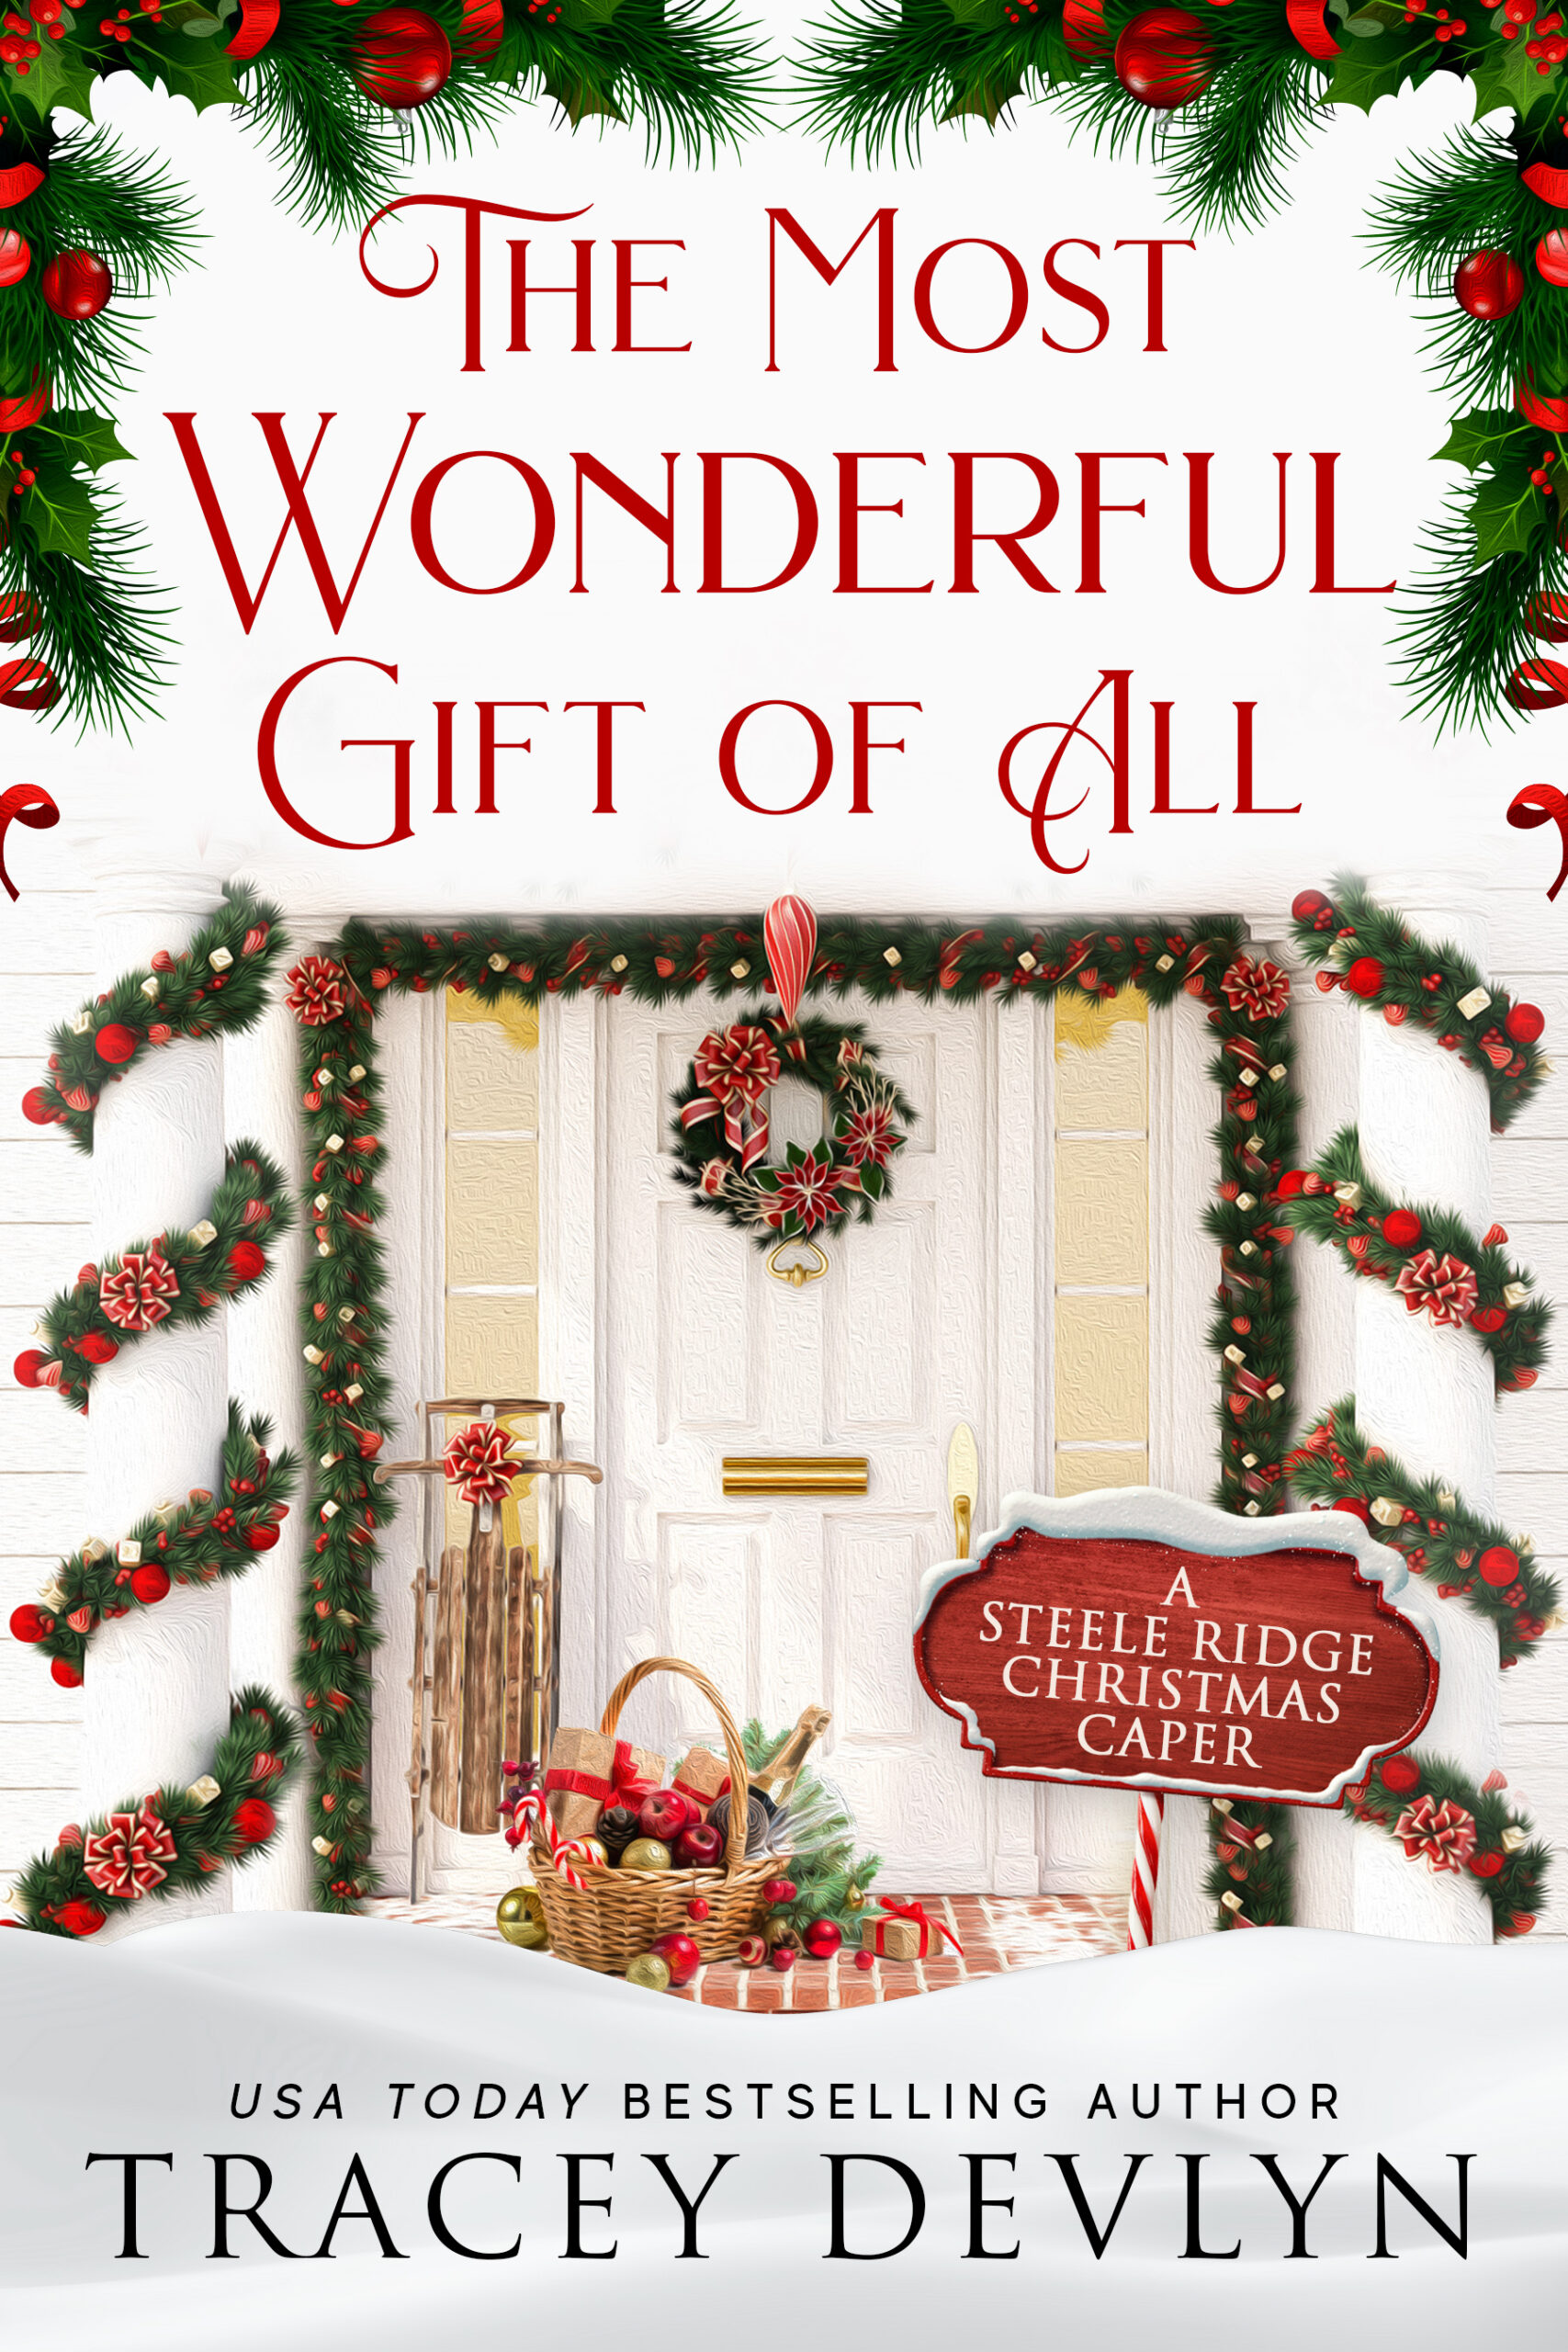 1 – The Most Wonderful Gift of All